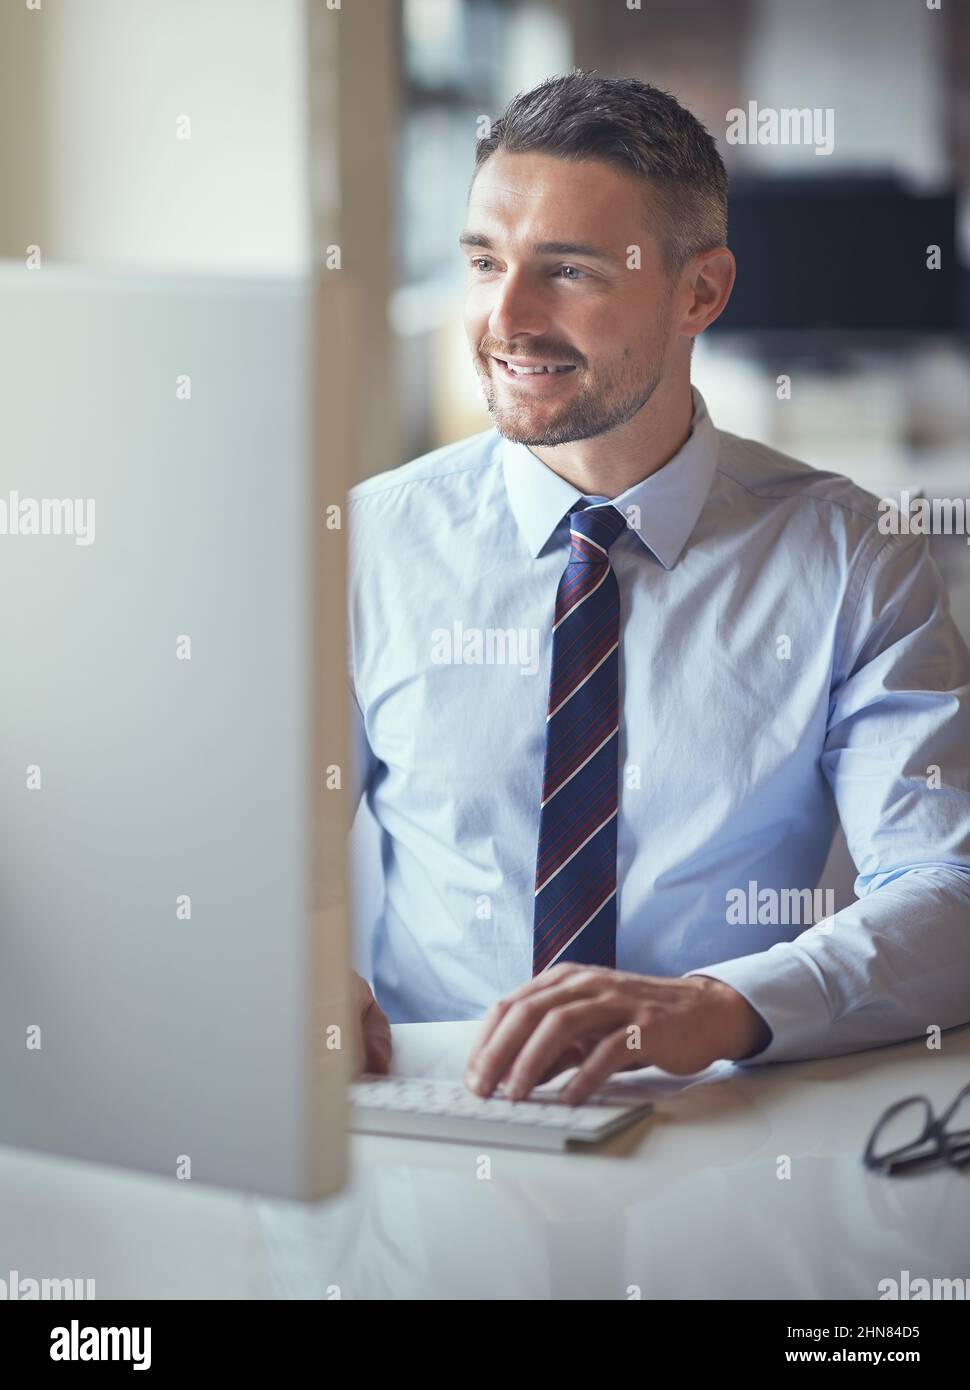 Business person desktop accessories and work tools Stock Photo by ©GaudiLab  77276956